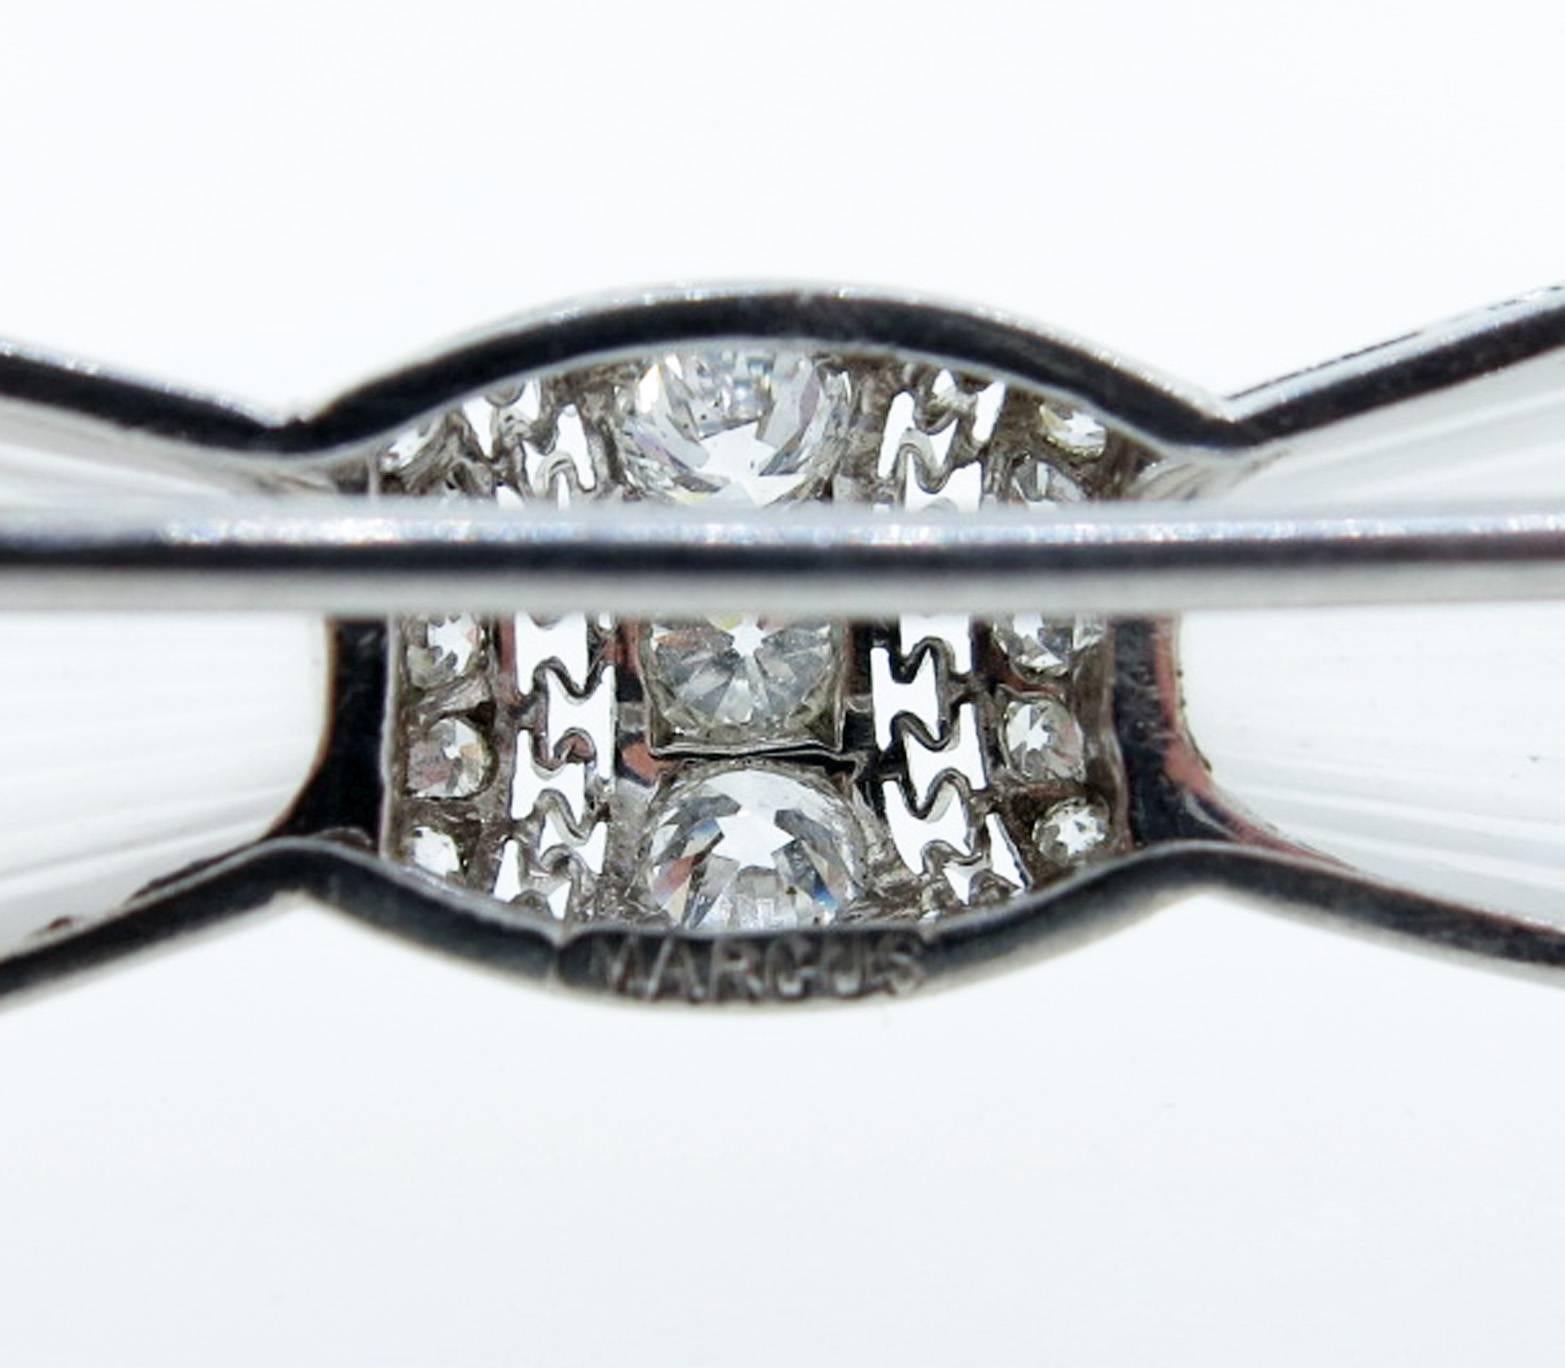 Art Deco carved crystal Marcus bow brooch circa 1925. The brooch measures approx 2 1/4 inches in length. The center is bead set with three old European cut diamonds each weighing approx .15cts. The open work platinum mount is bead set with 50 round